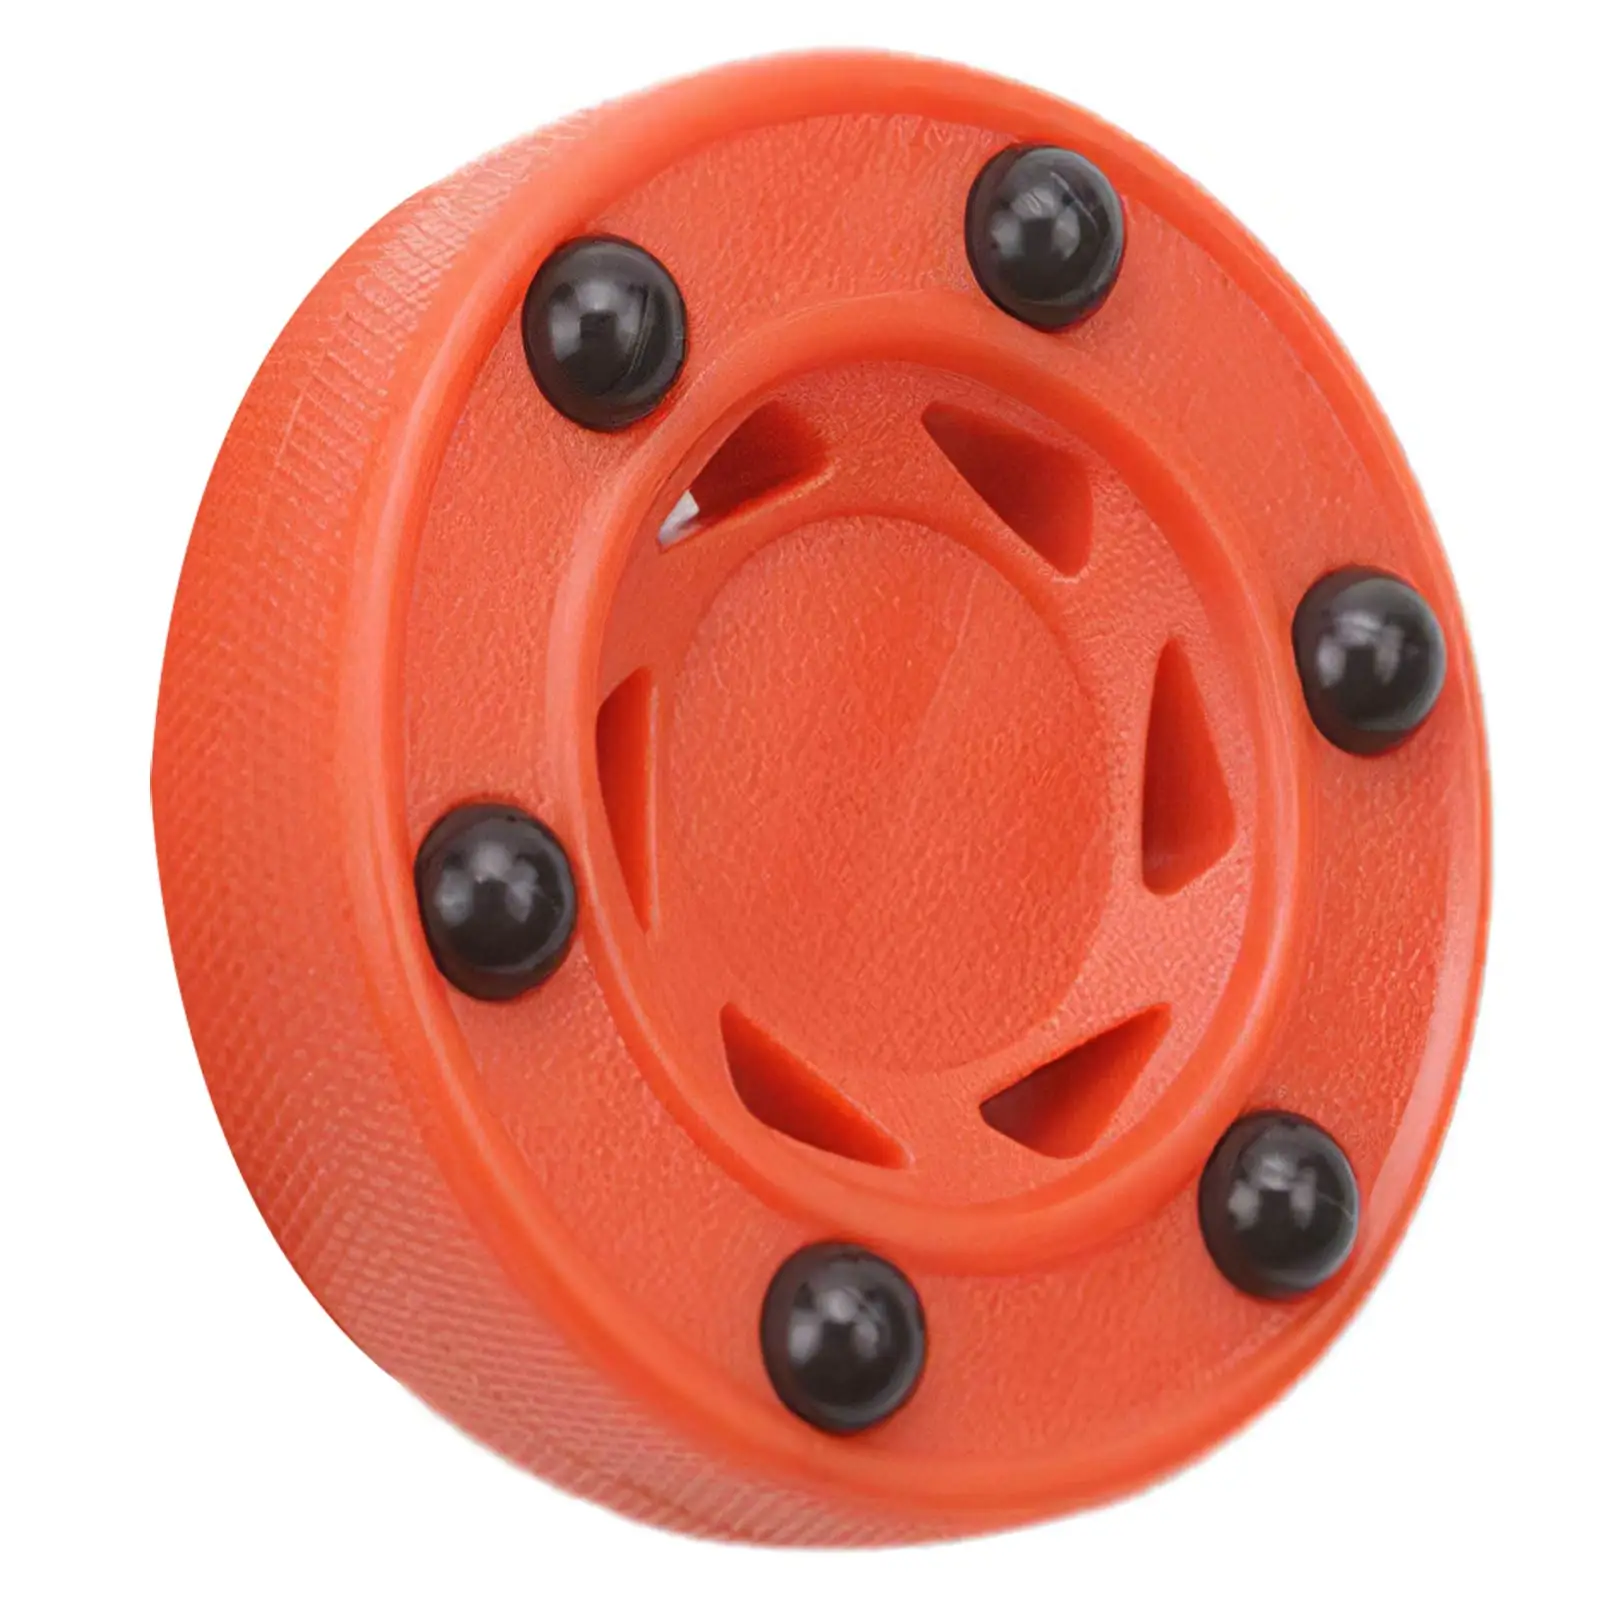 

Roller Hockey Durable ABS High-Density Good Quality Practice Puck Perfectly Balance For Ice Inline Street Roller Hockey Training